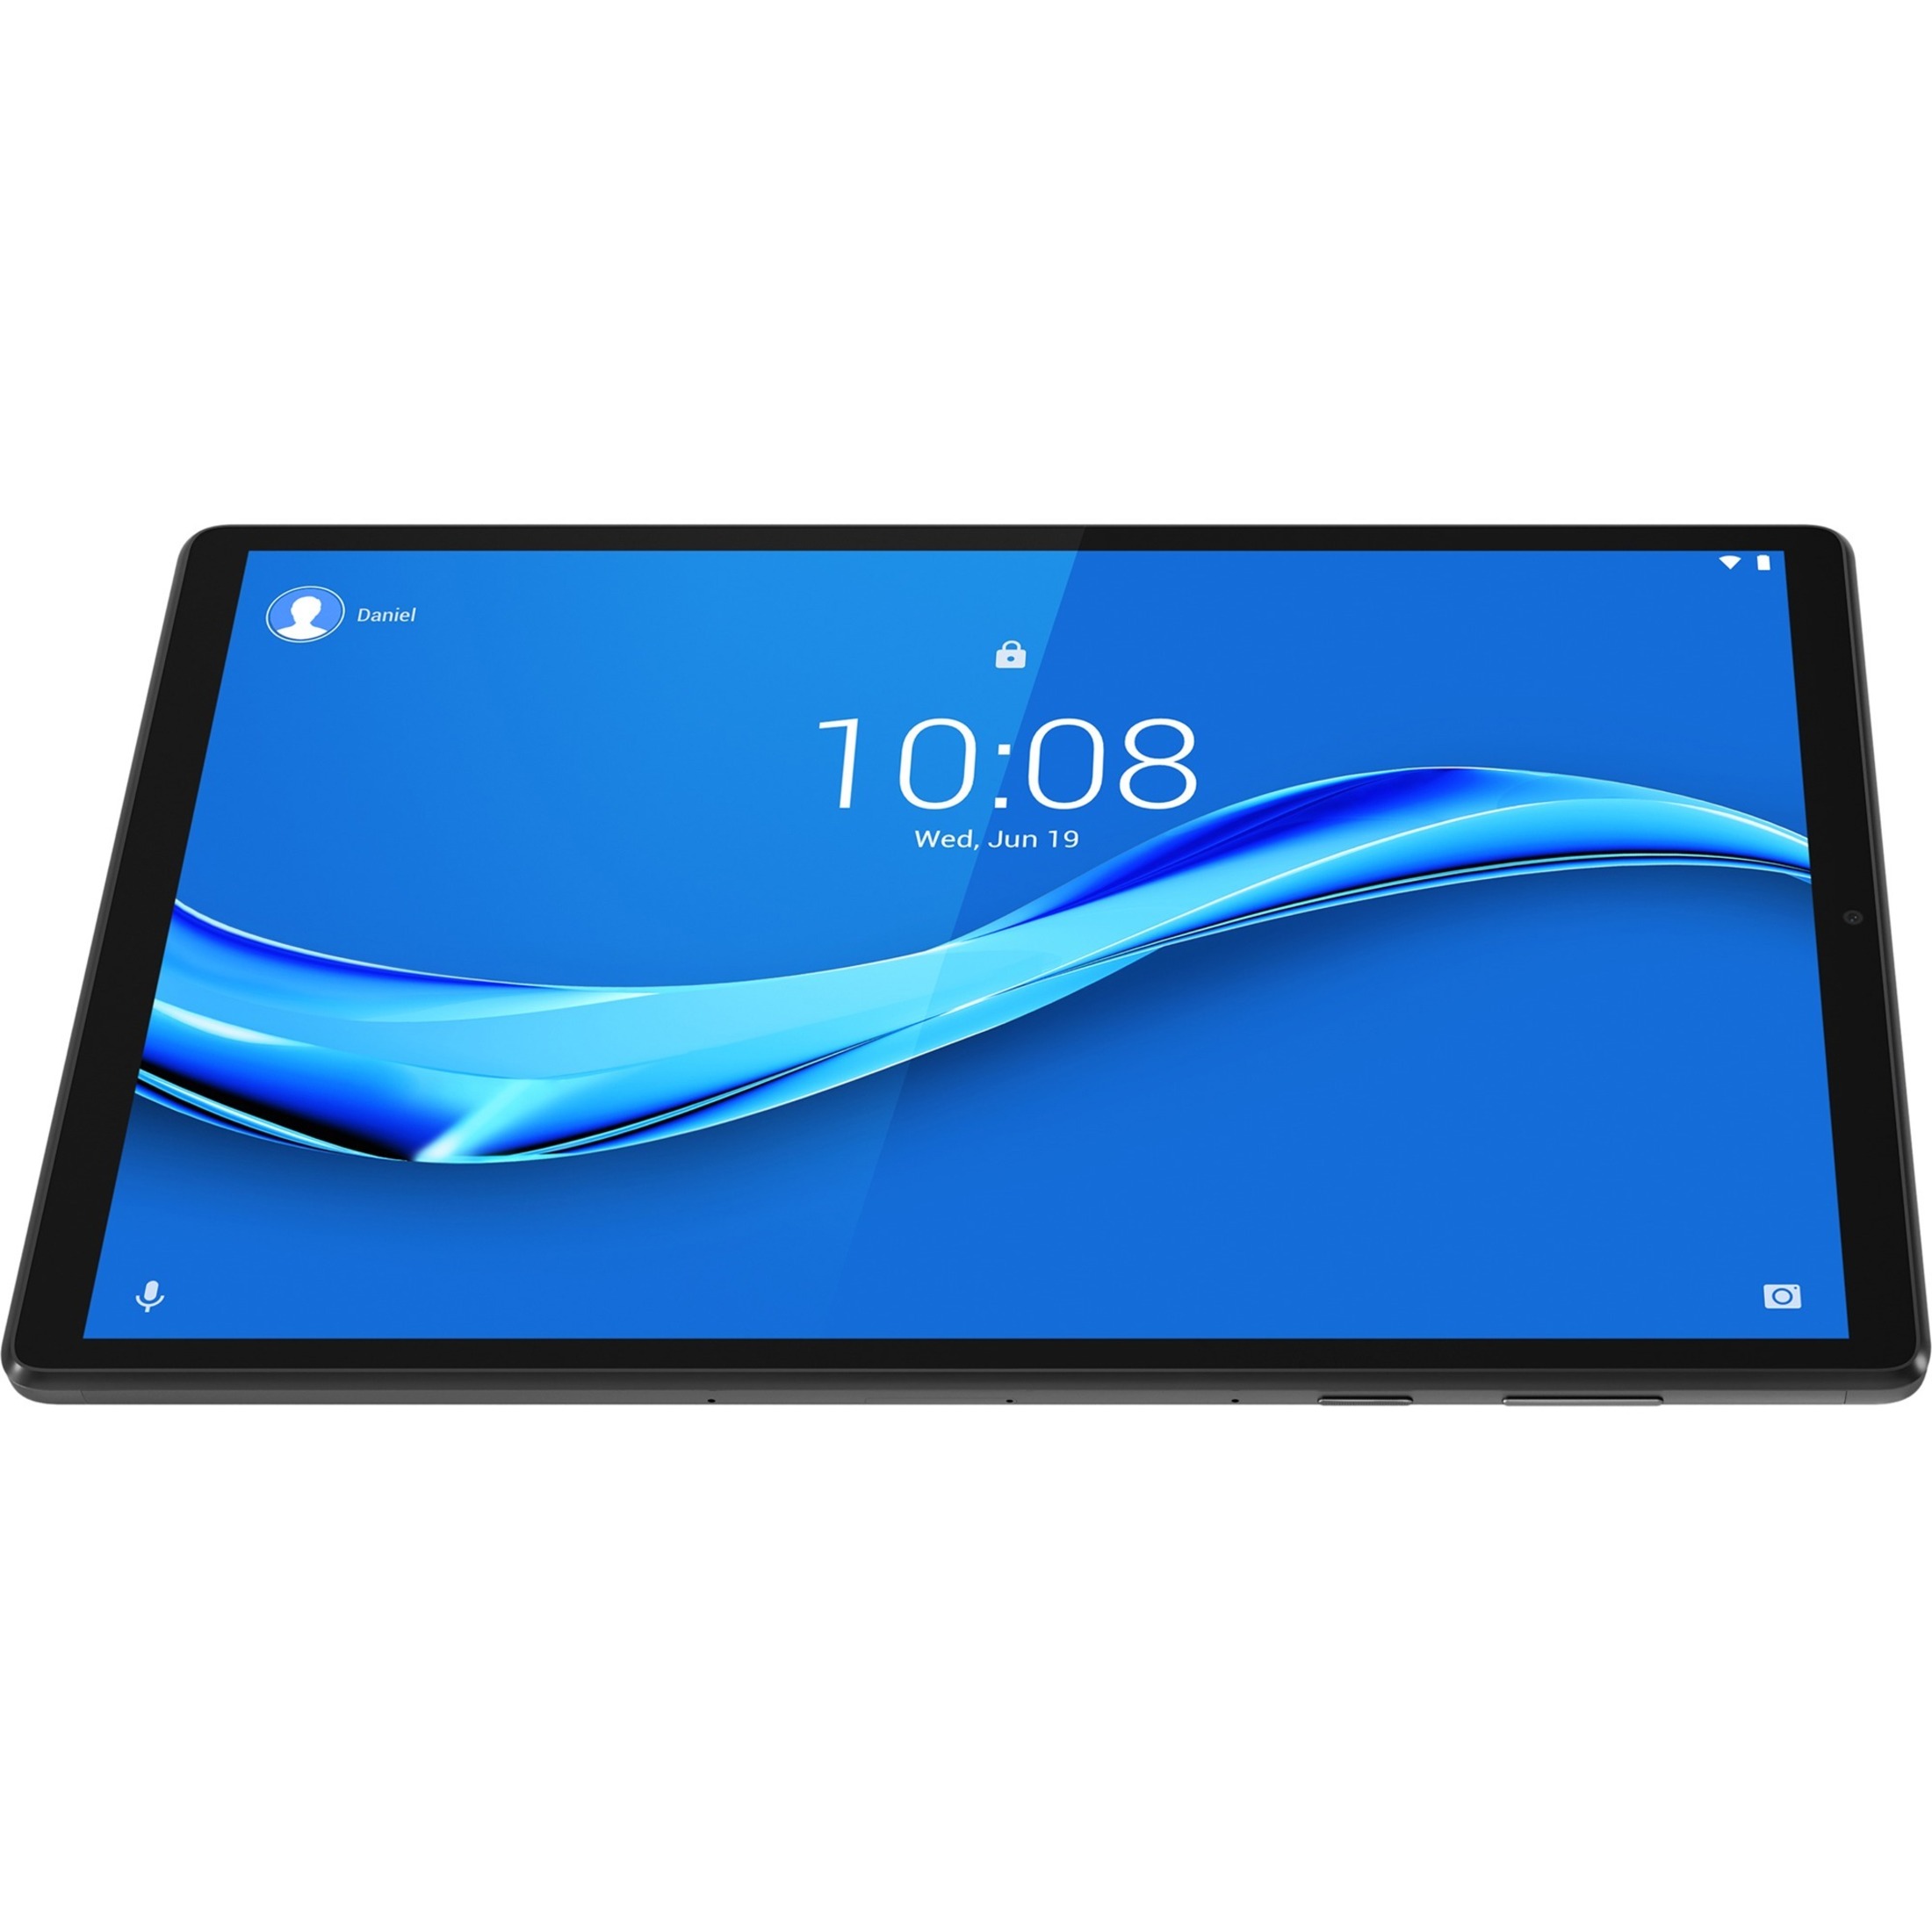 Lenovo Tab M10 10.3" Tablet - MediaTek Helio P22T - 4GB - 64GB FHD Plus with the Smart Charging Station - Android 9.0 (Pie) - image 24 of 33